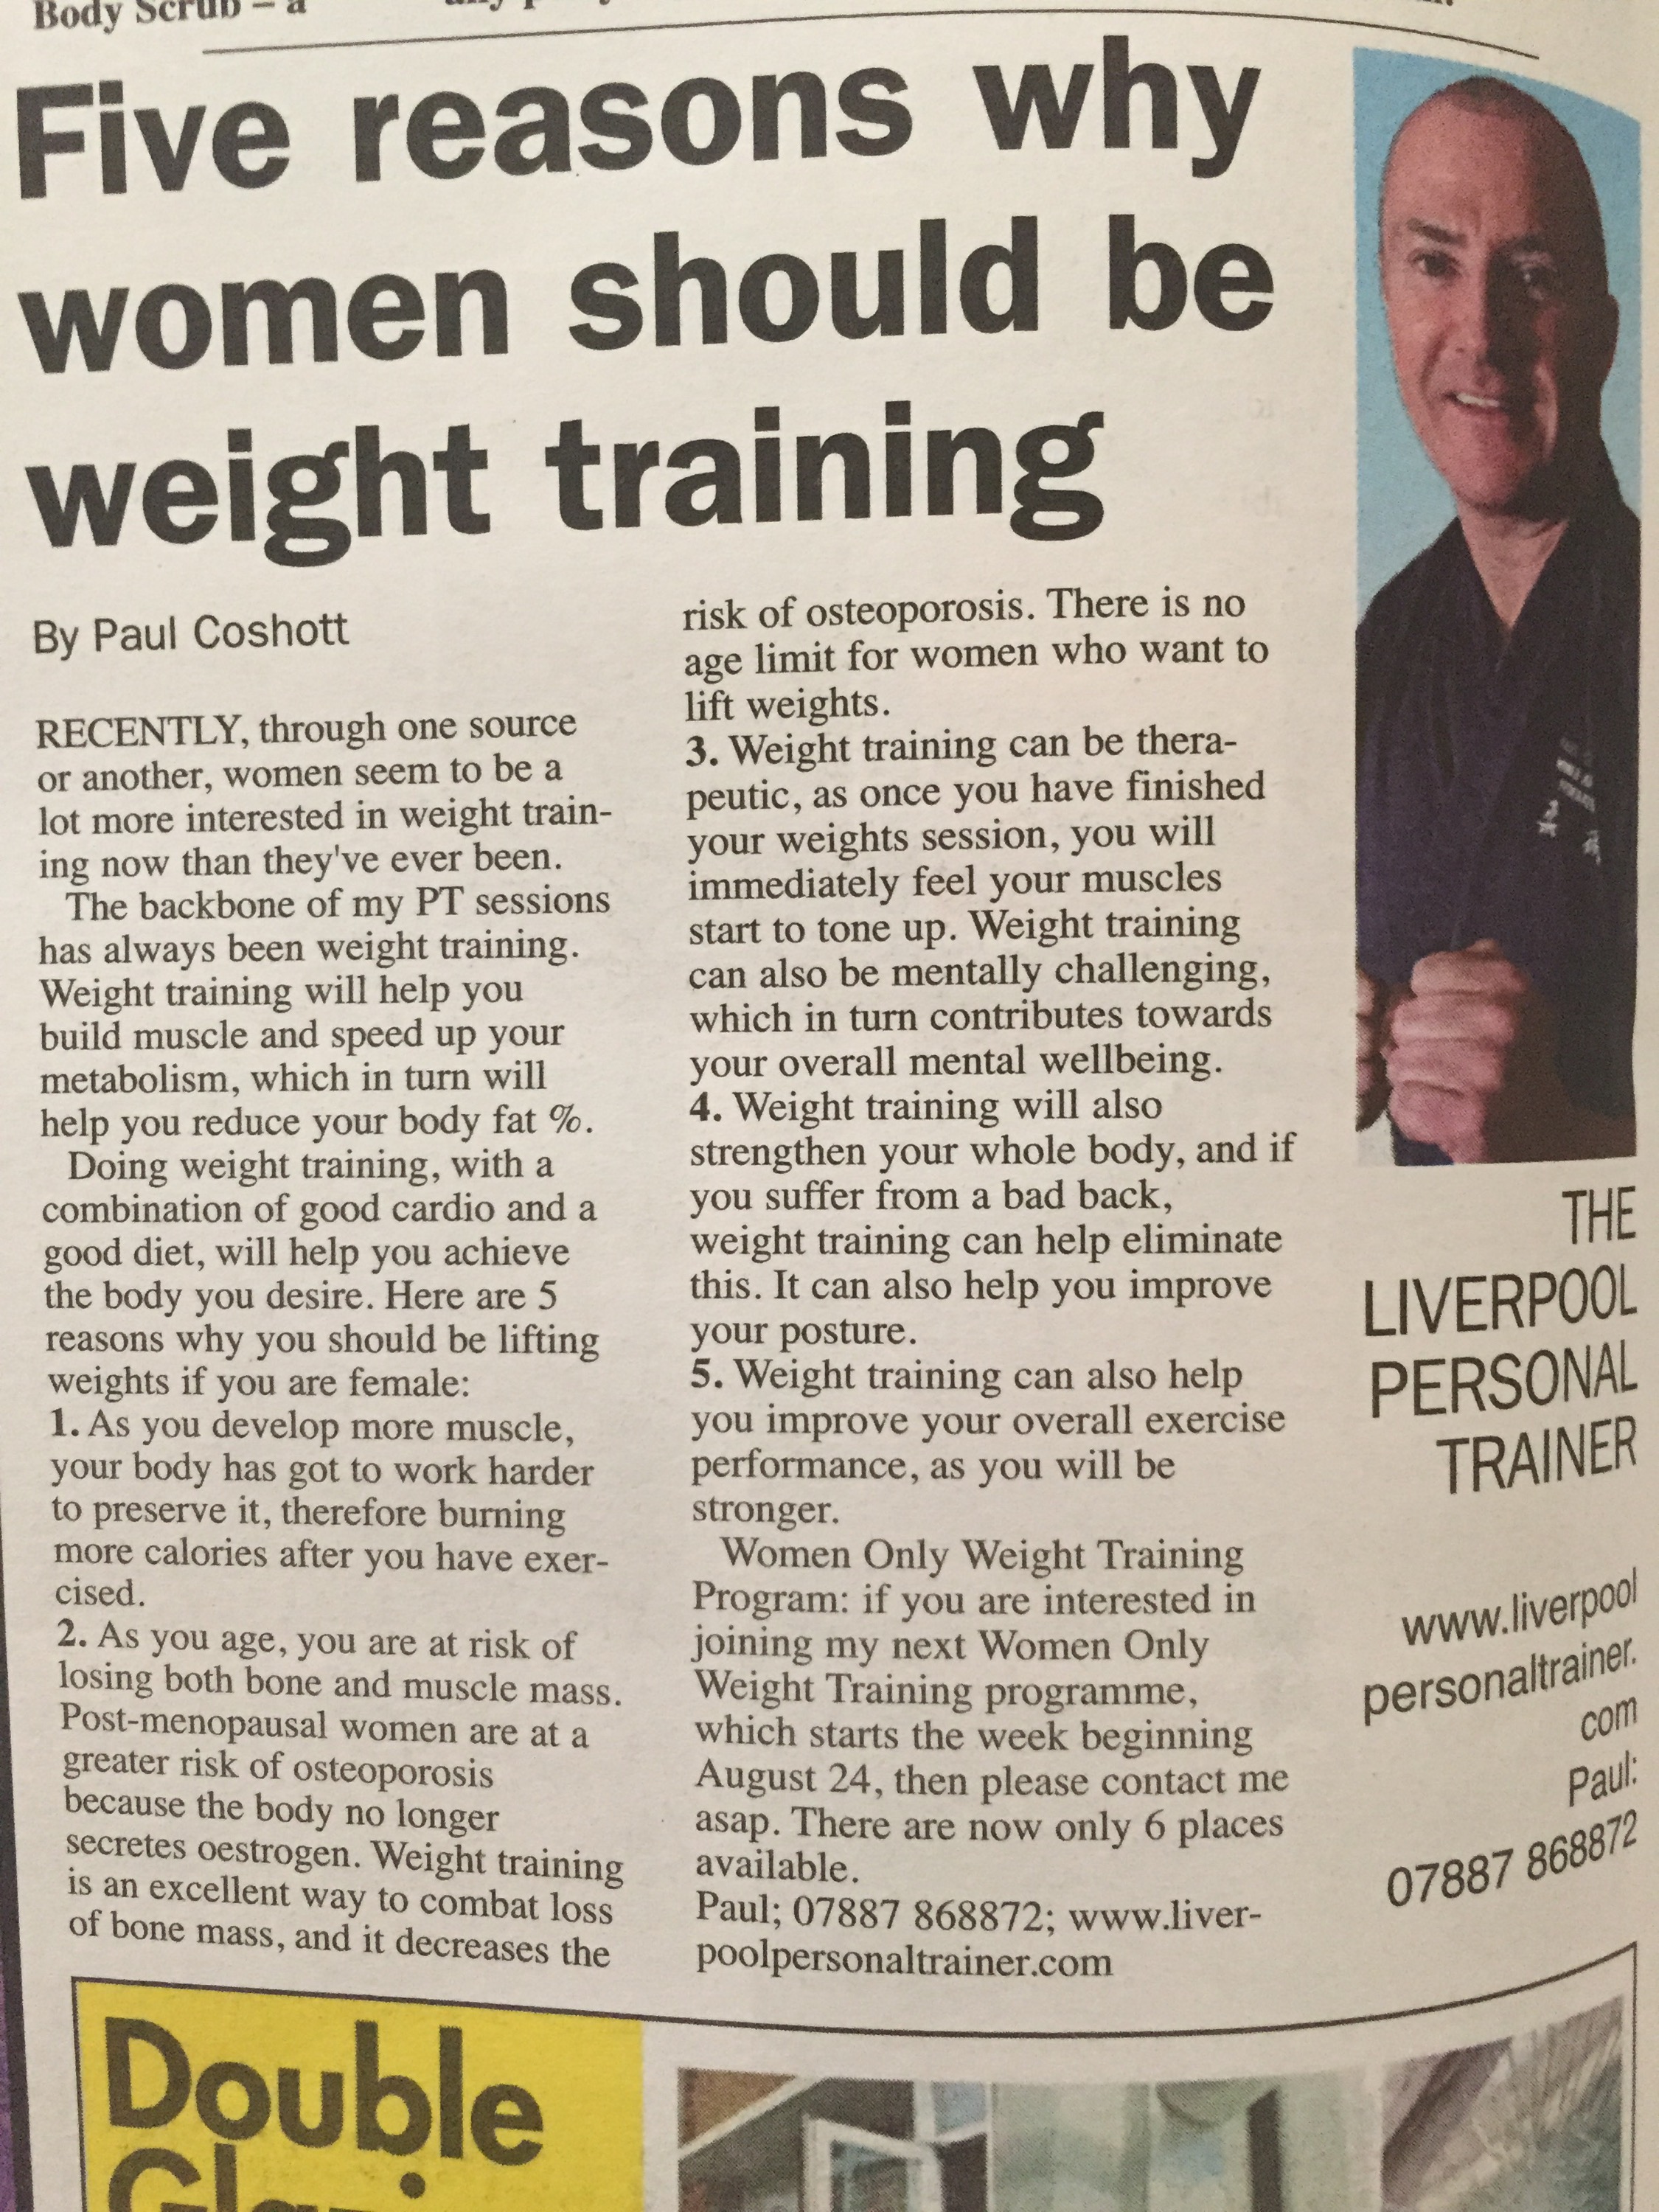 Why women should be weight training. My latest article 